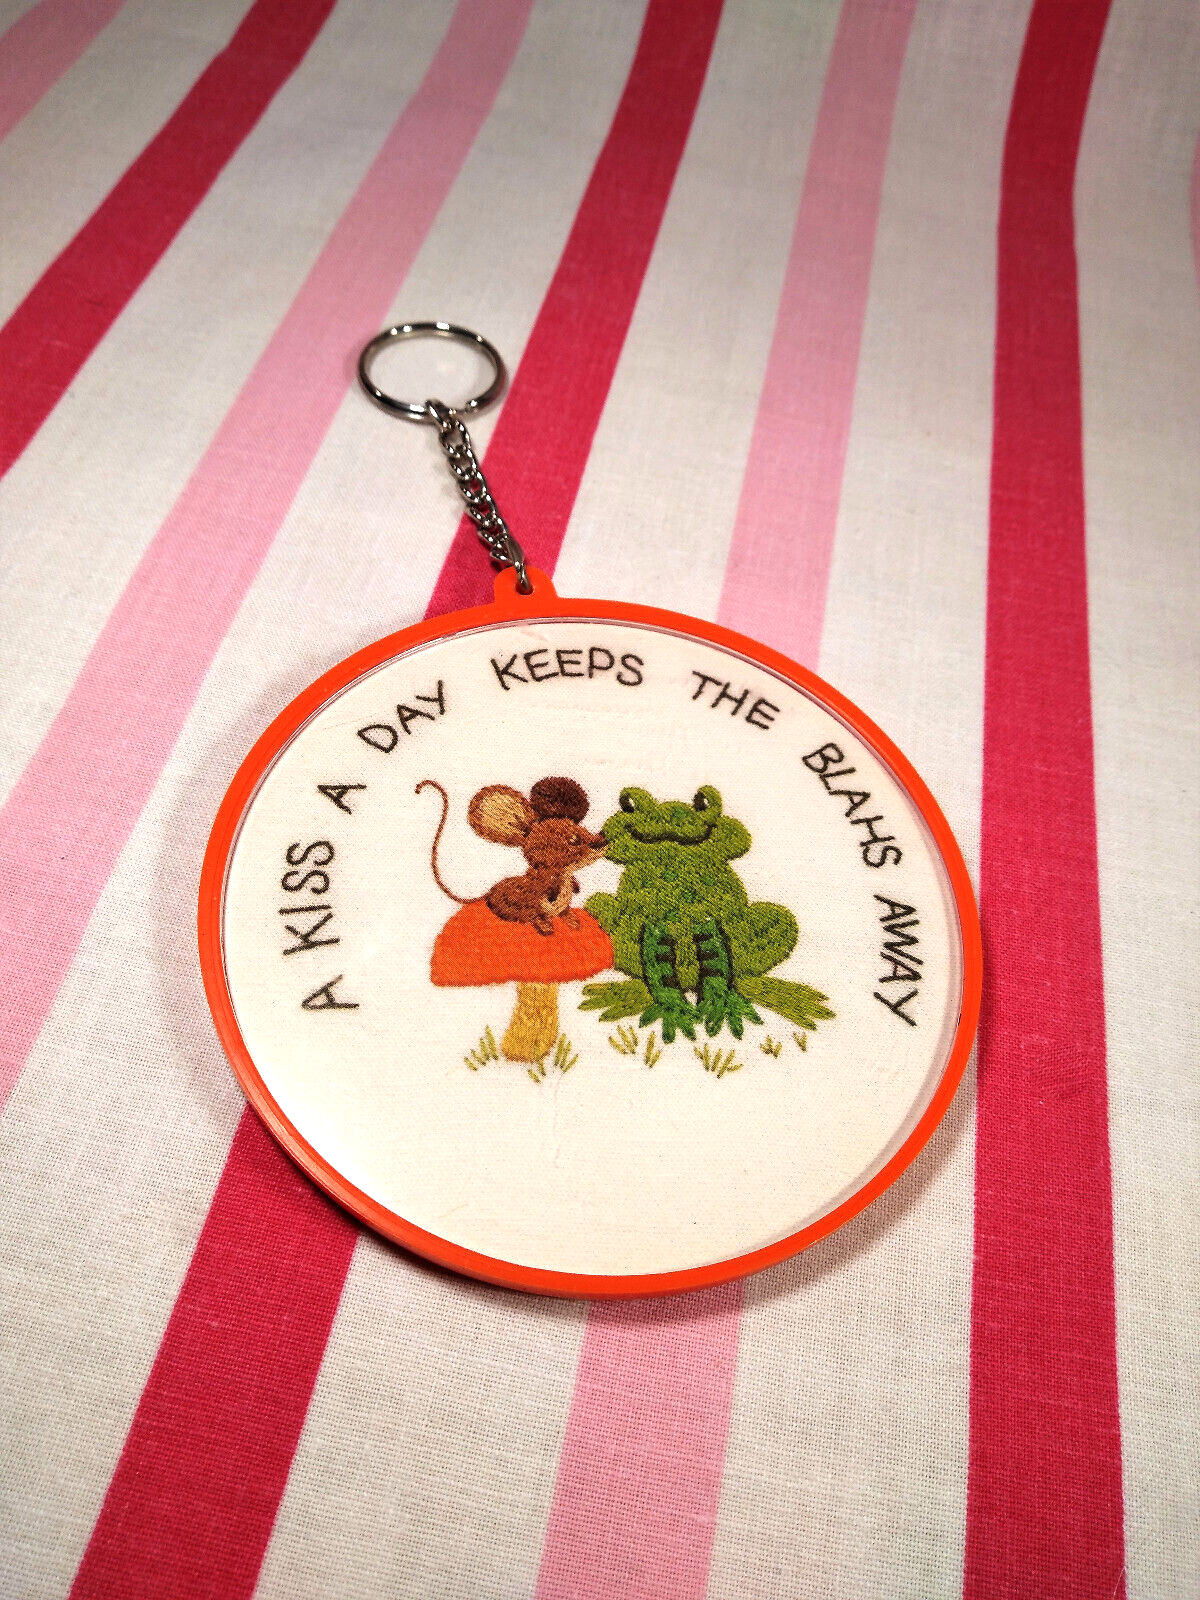 Primary image for Fun 1980's Large Round Hallmark Key Chain "A Kiss A Day Keeps The Blahs Away"